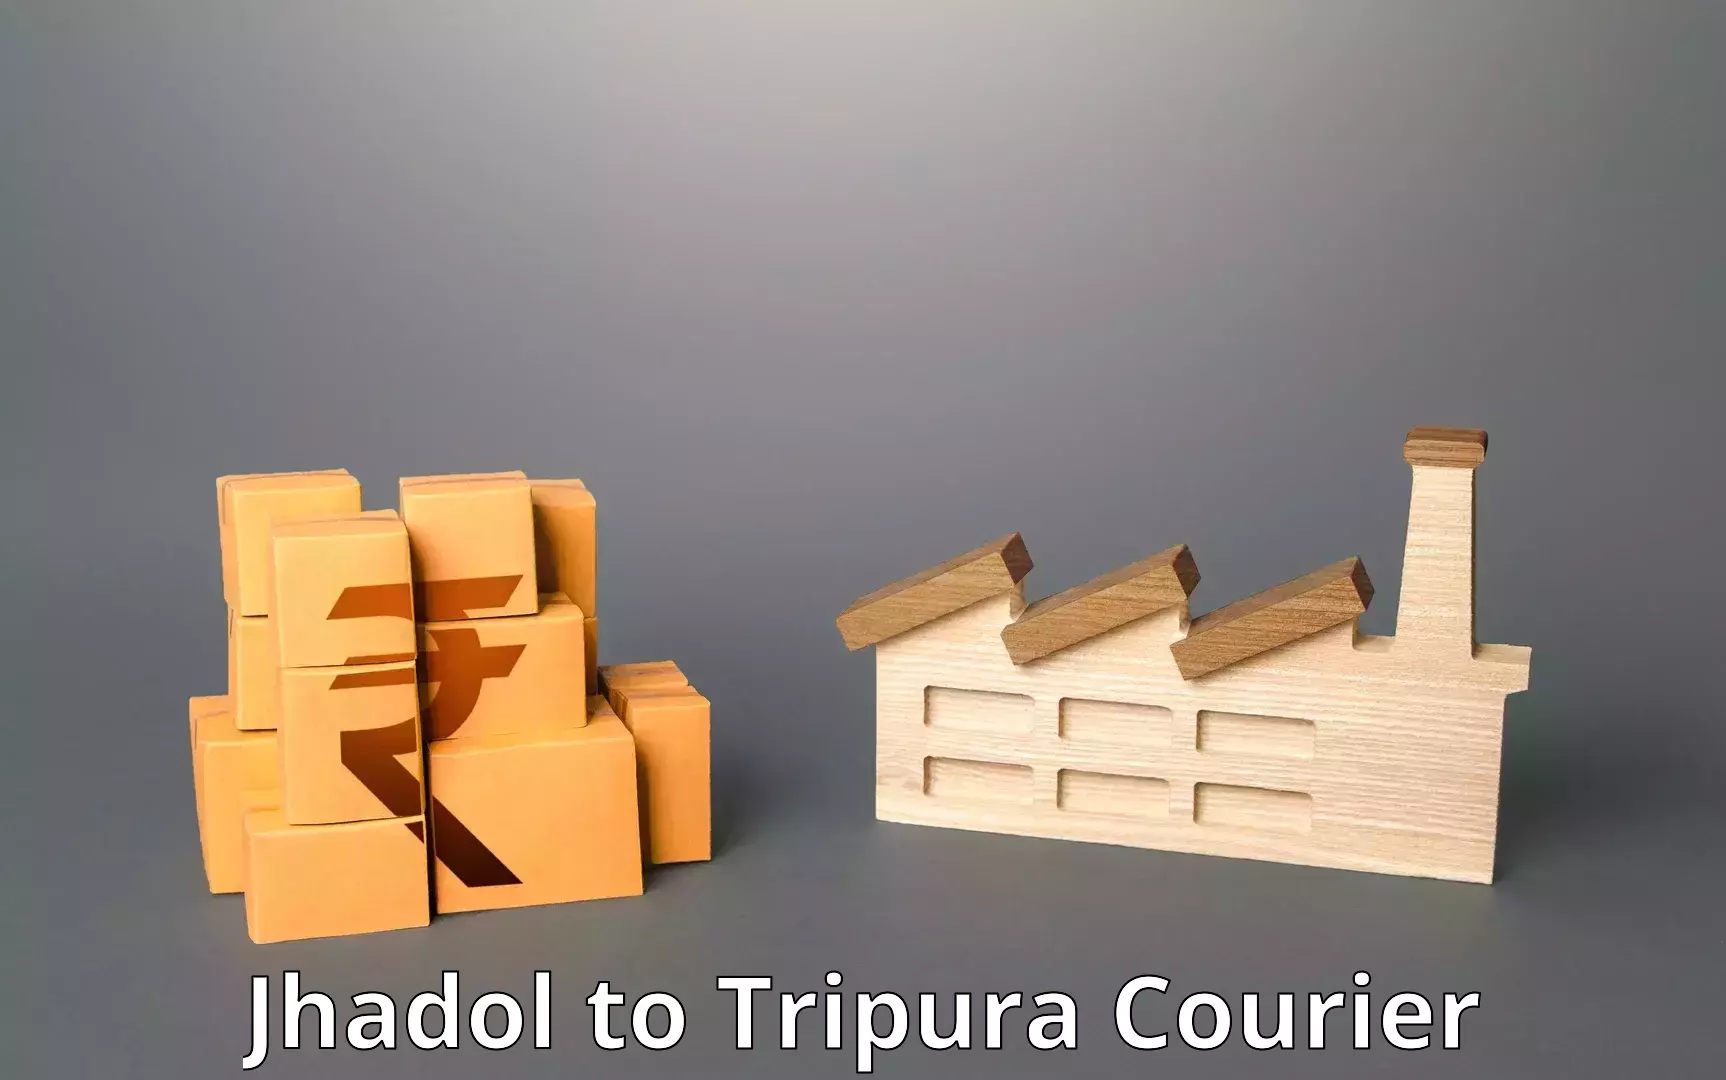 Cost-effective courier solutions Jhadol to Udaipur Tripura